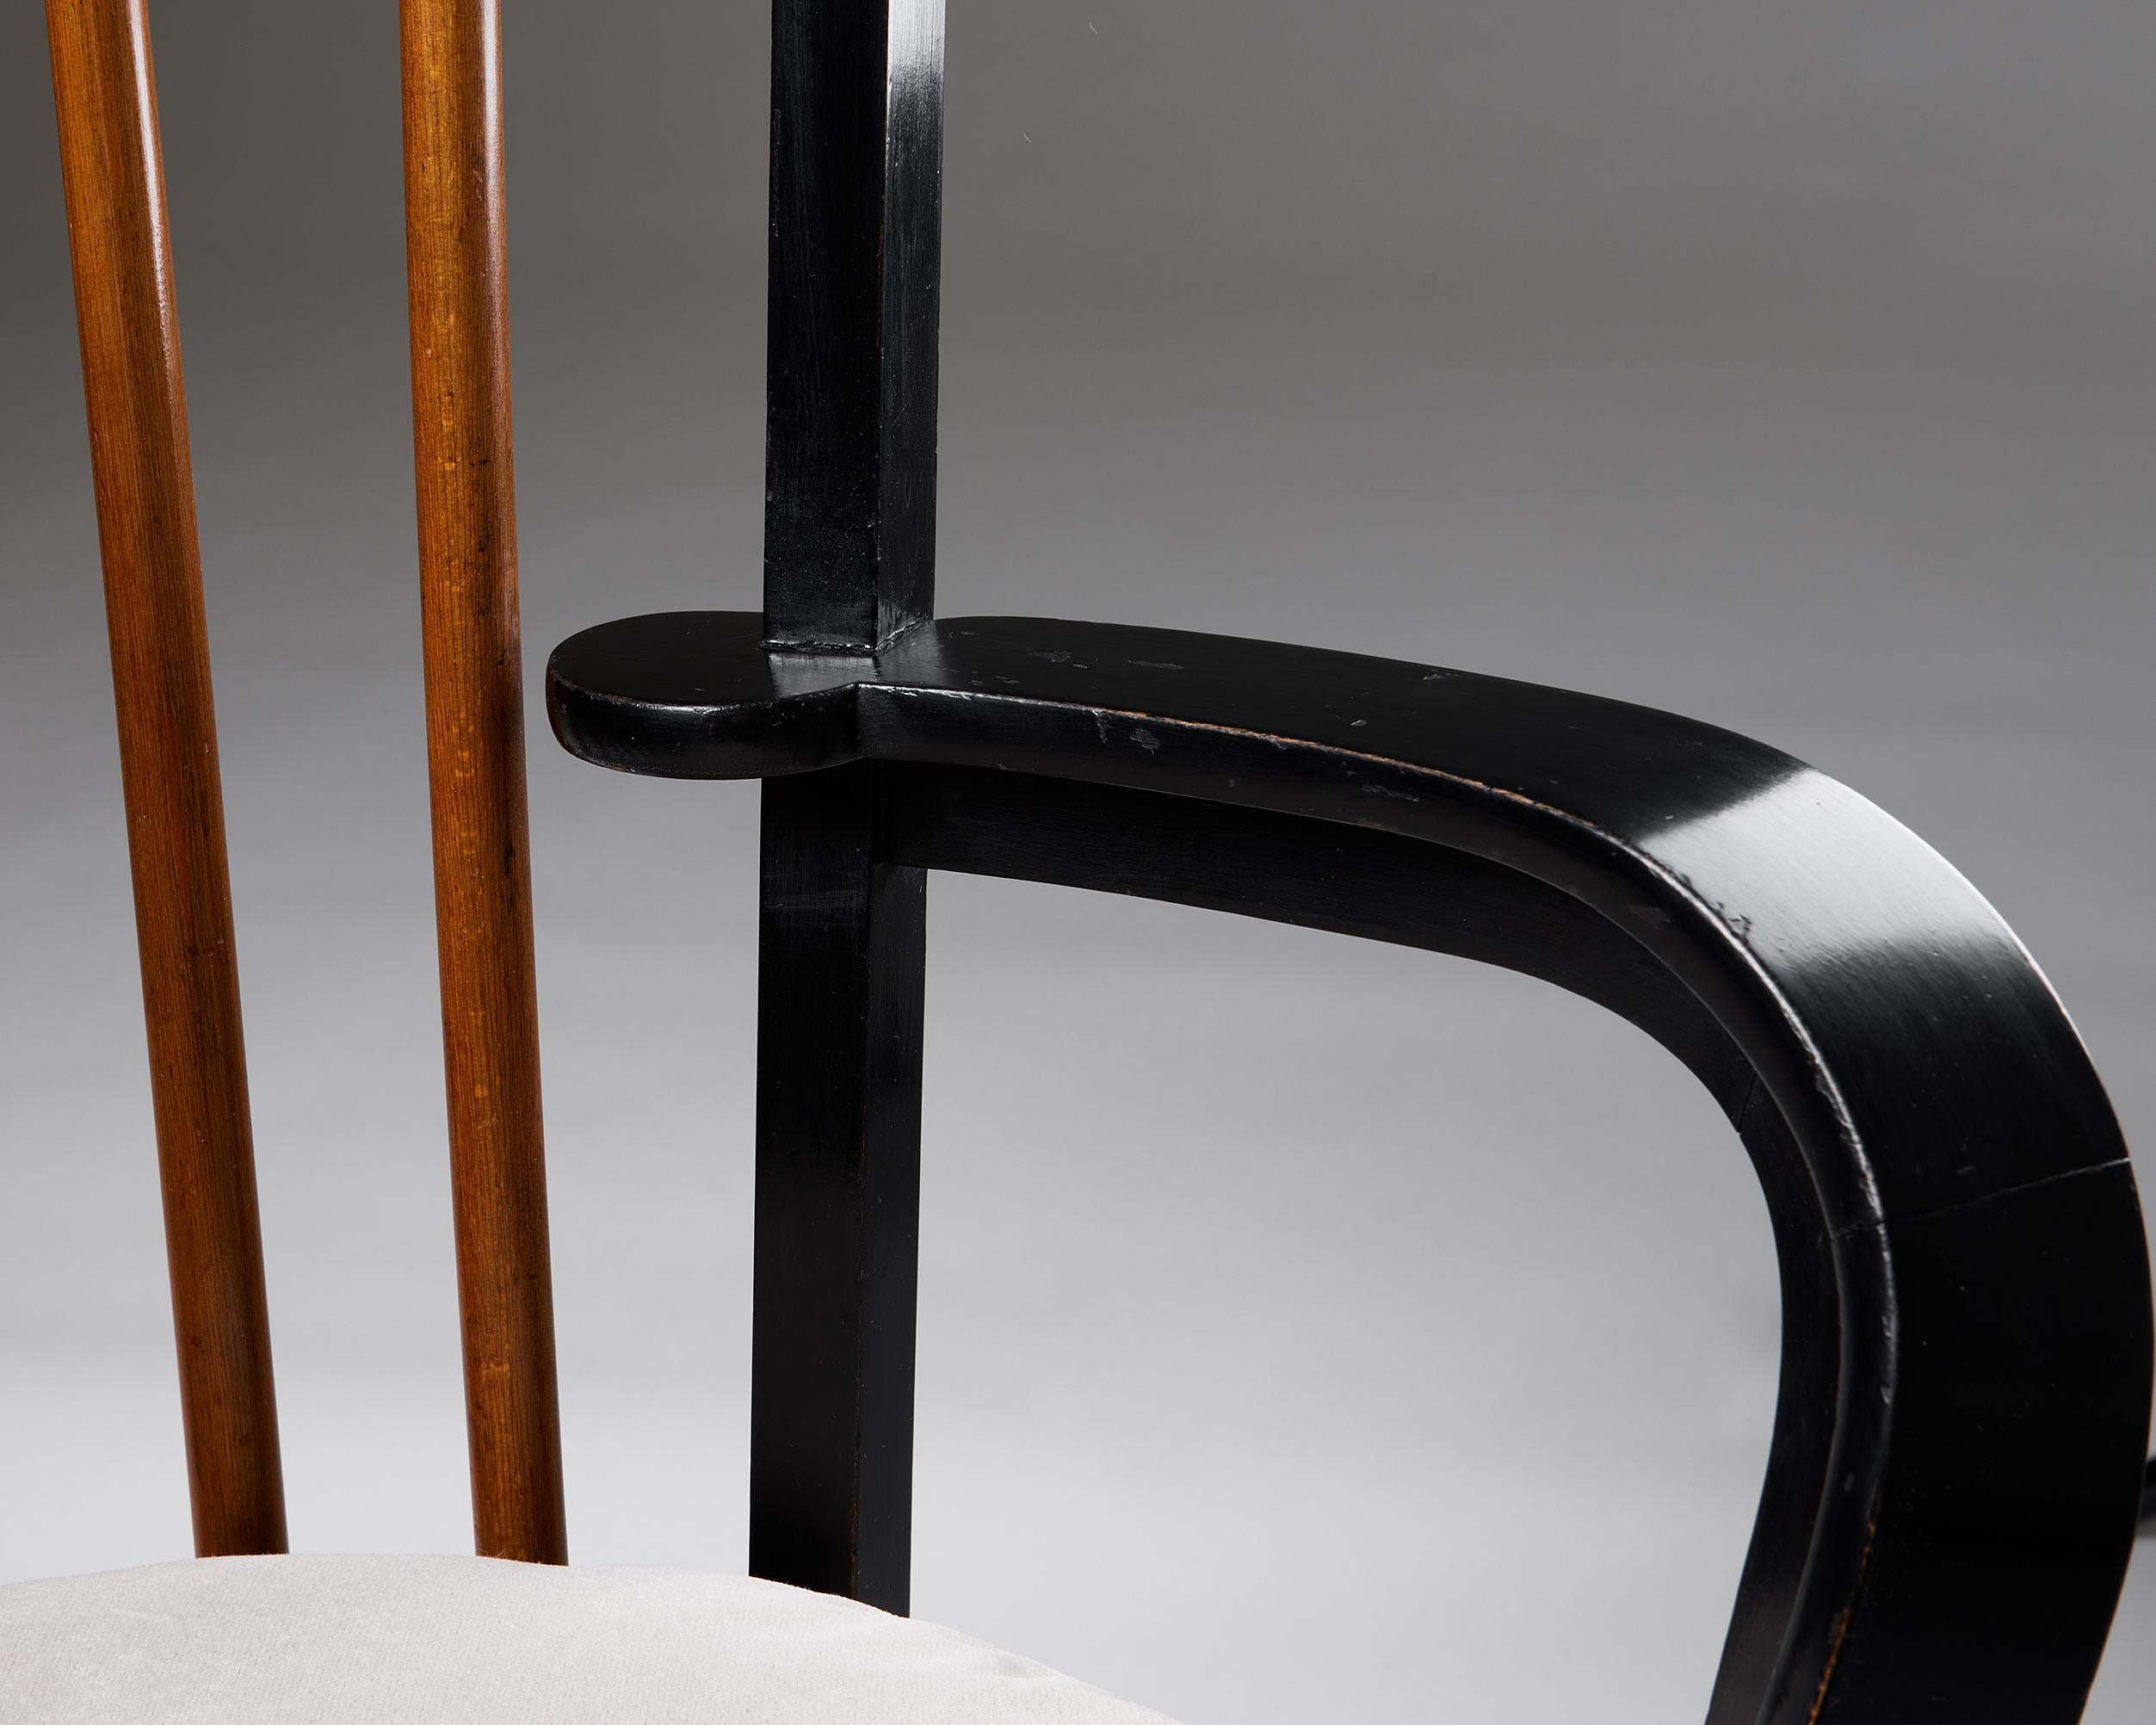 Armchair ‘Bridge’ Designed by Axel Einar Hjorth for Nk, Sweden, 1930s For Sale 2